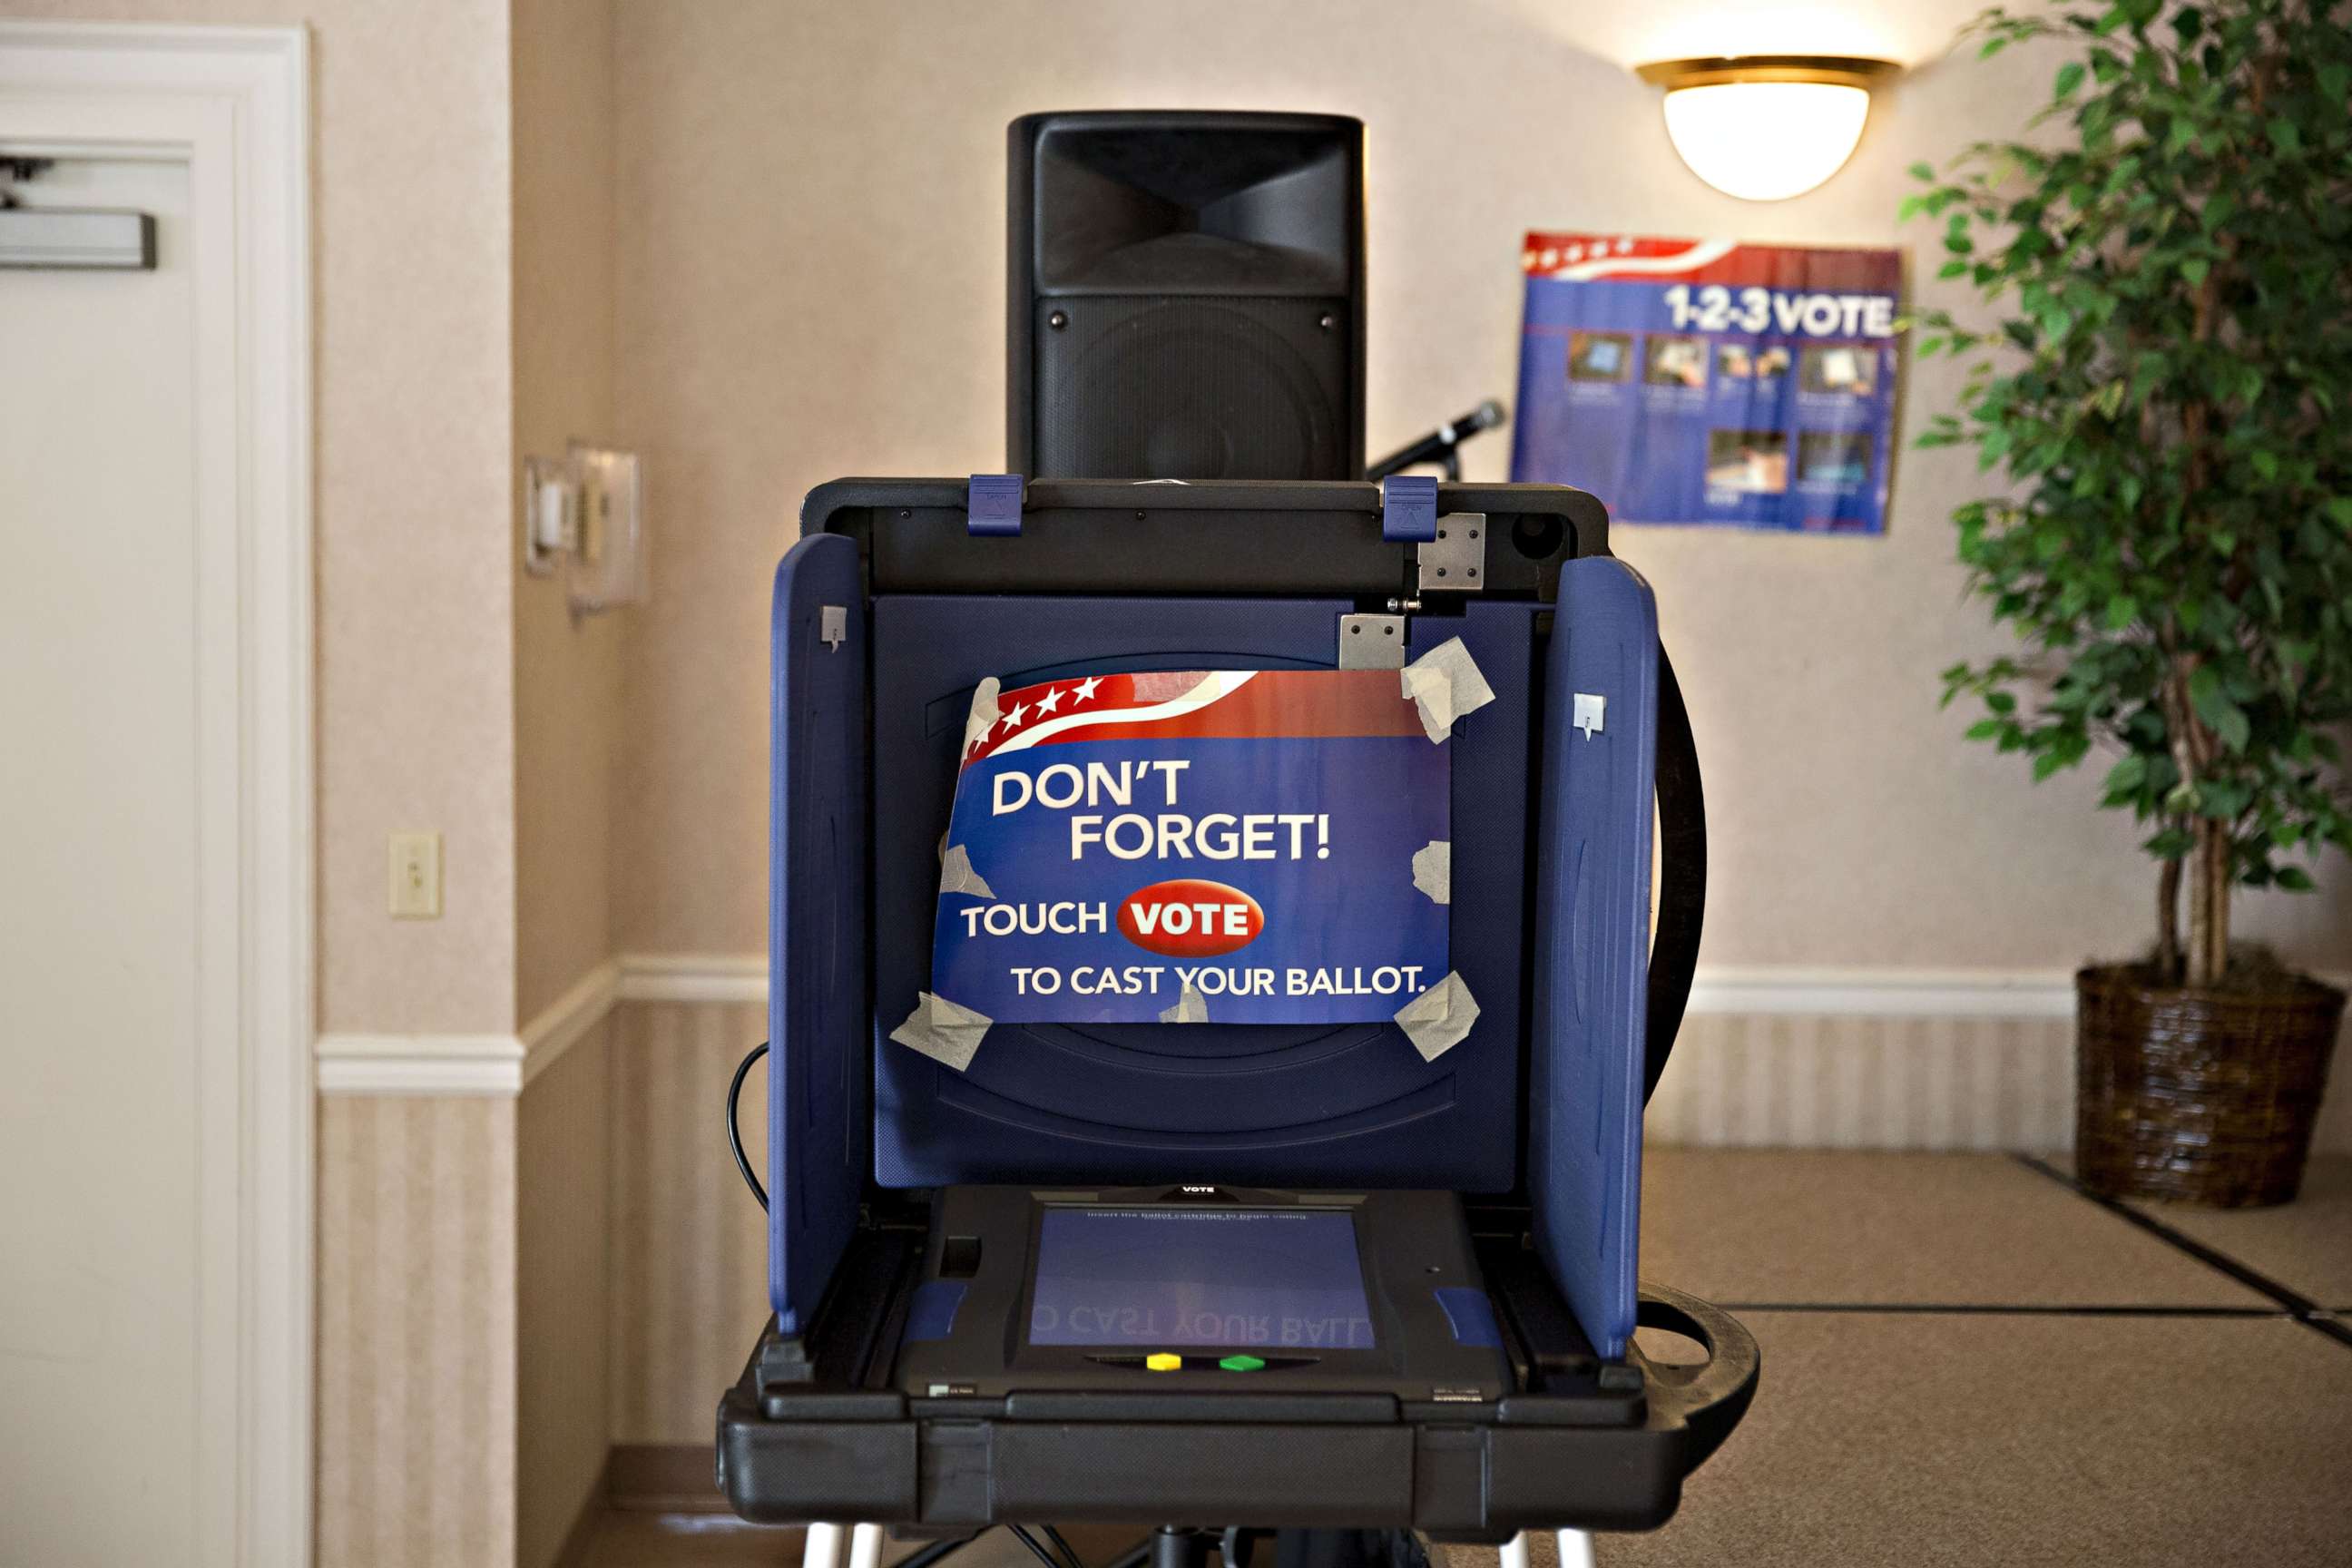 PHOTO: An electronic voting booth stands at a polling station inside Our Savior Lutheran Church during the South Carolina Republican presidential primary election in Columbia, South Carolina on Feb. 20, 2016. 